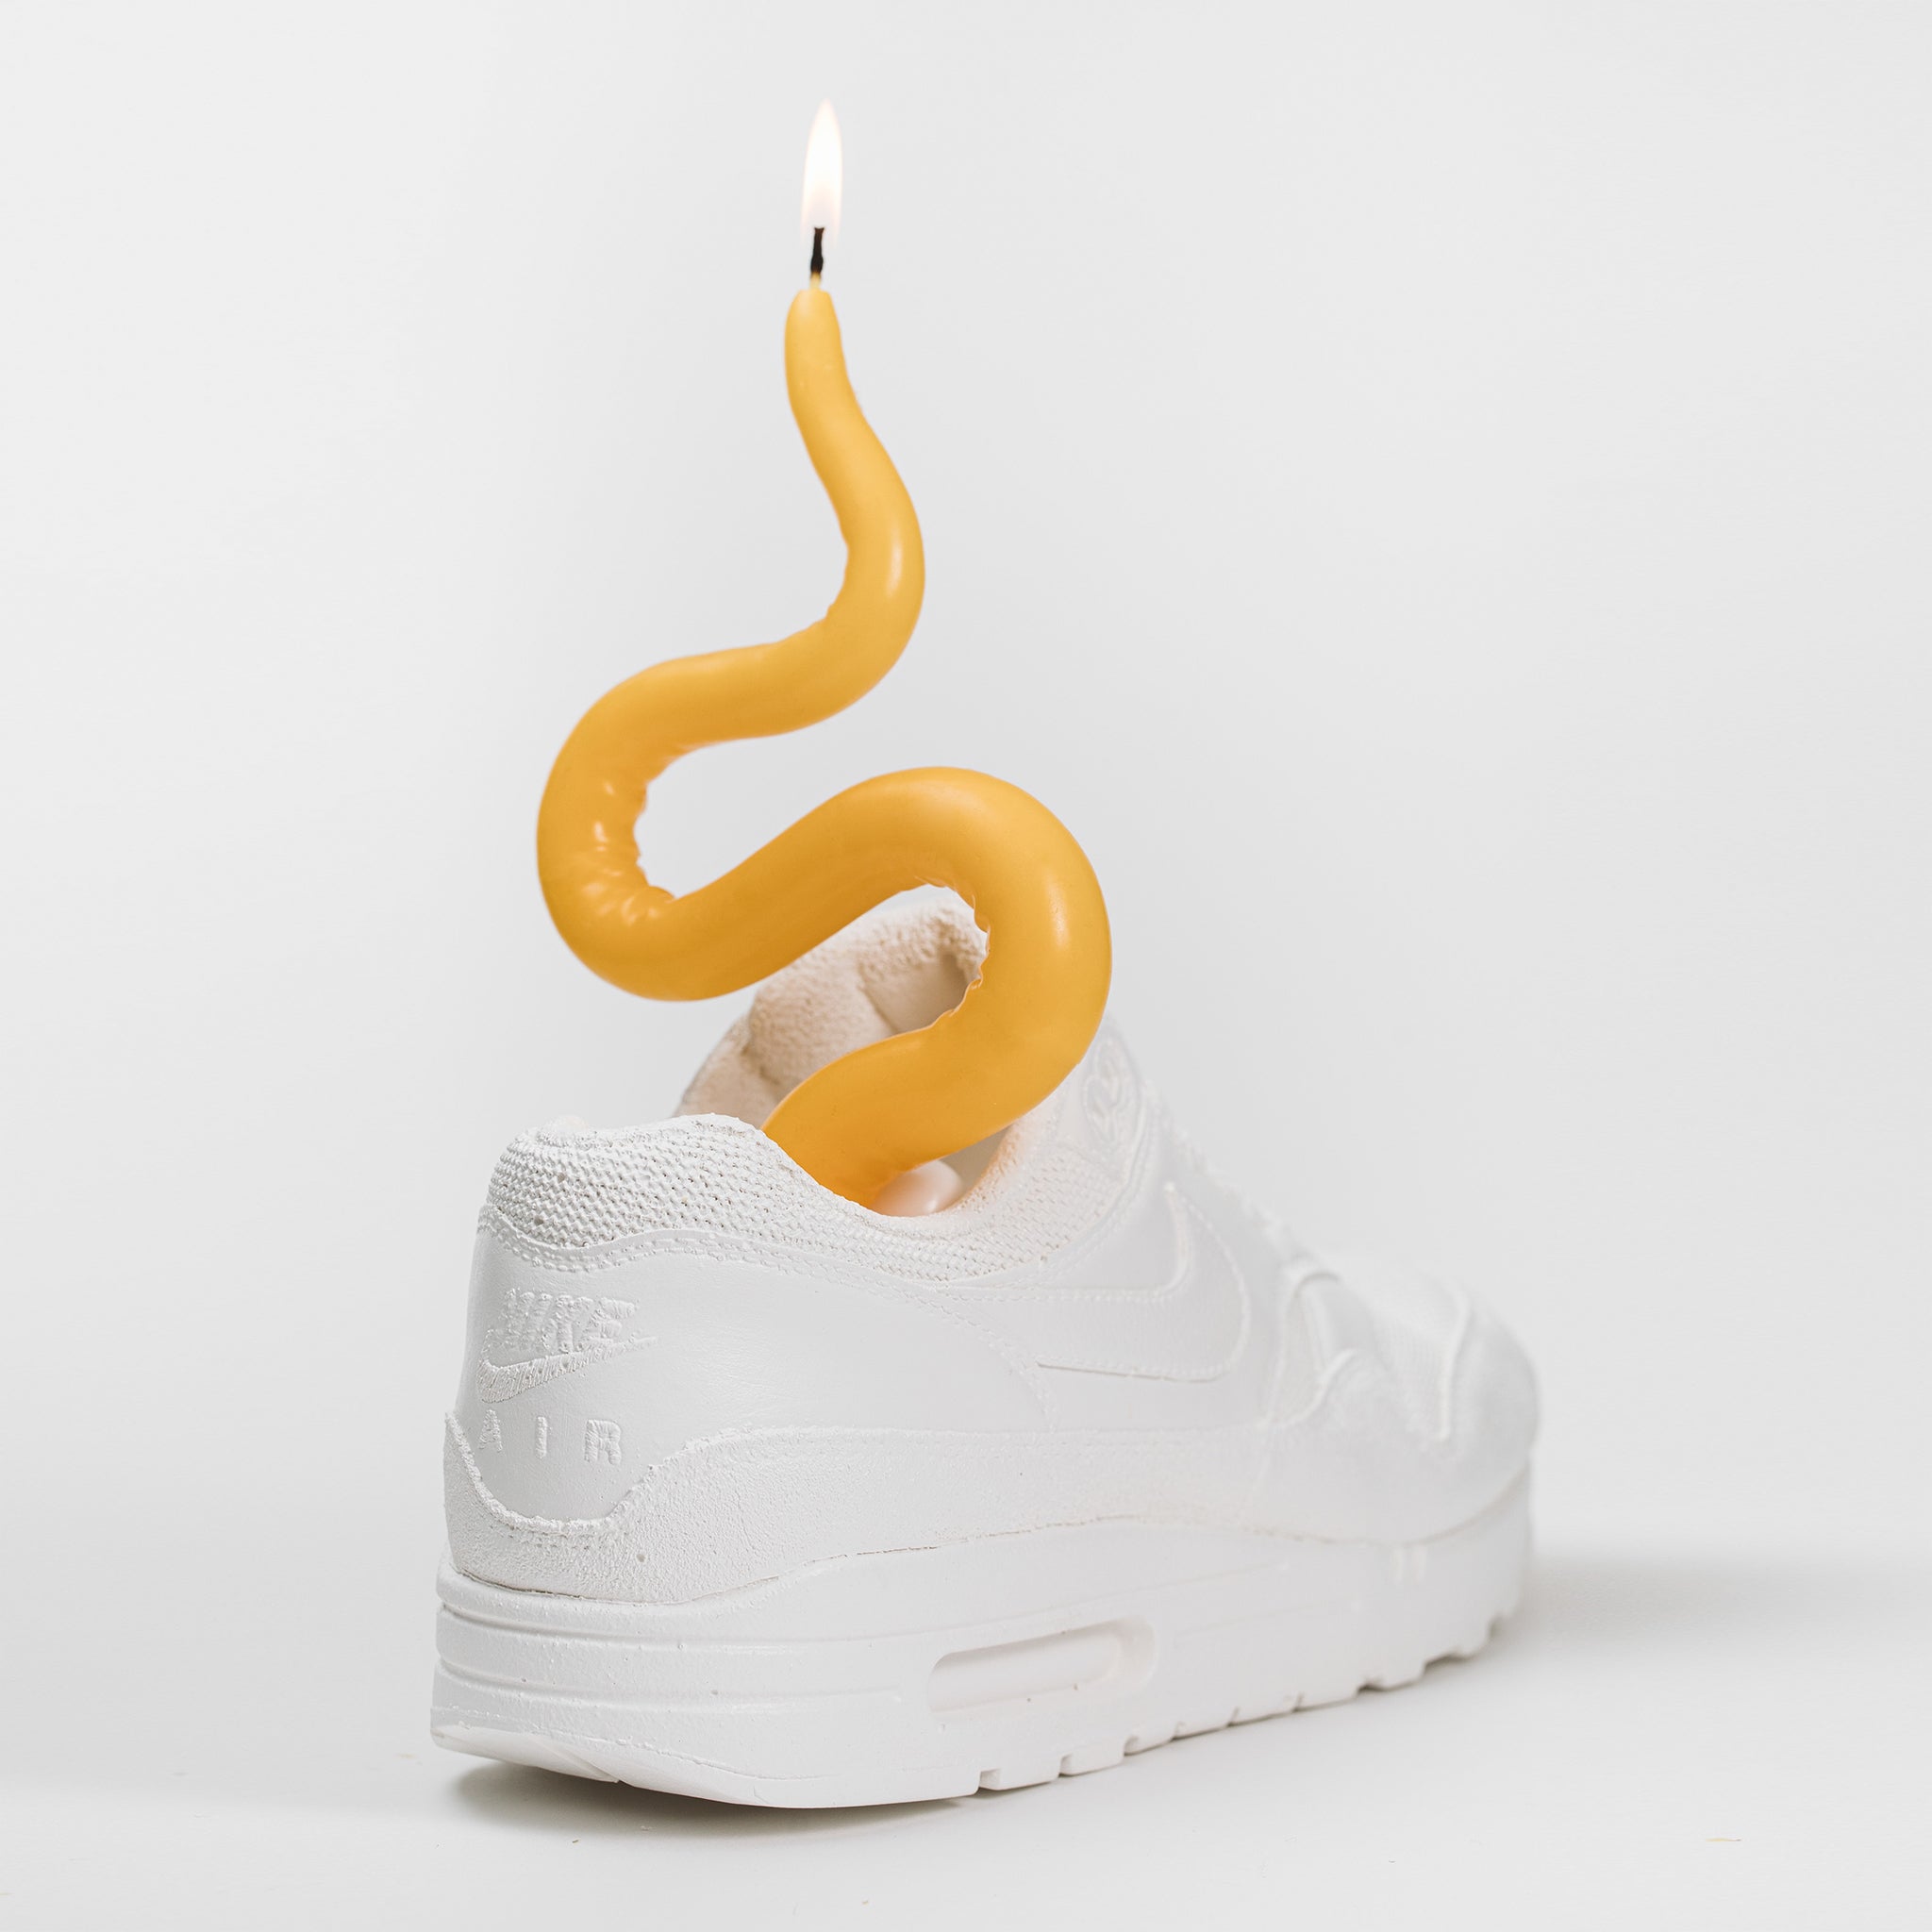 Nike sneaker candle holder